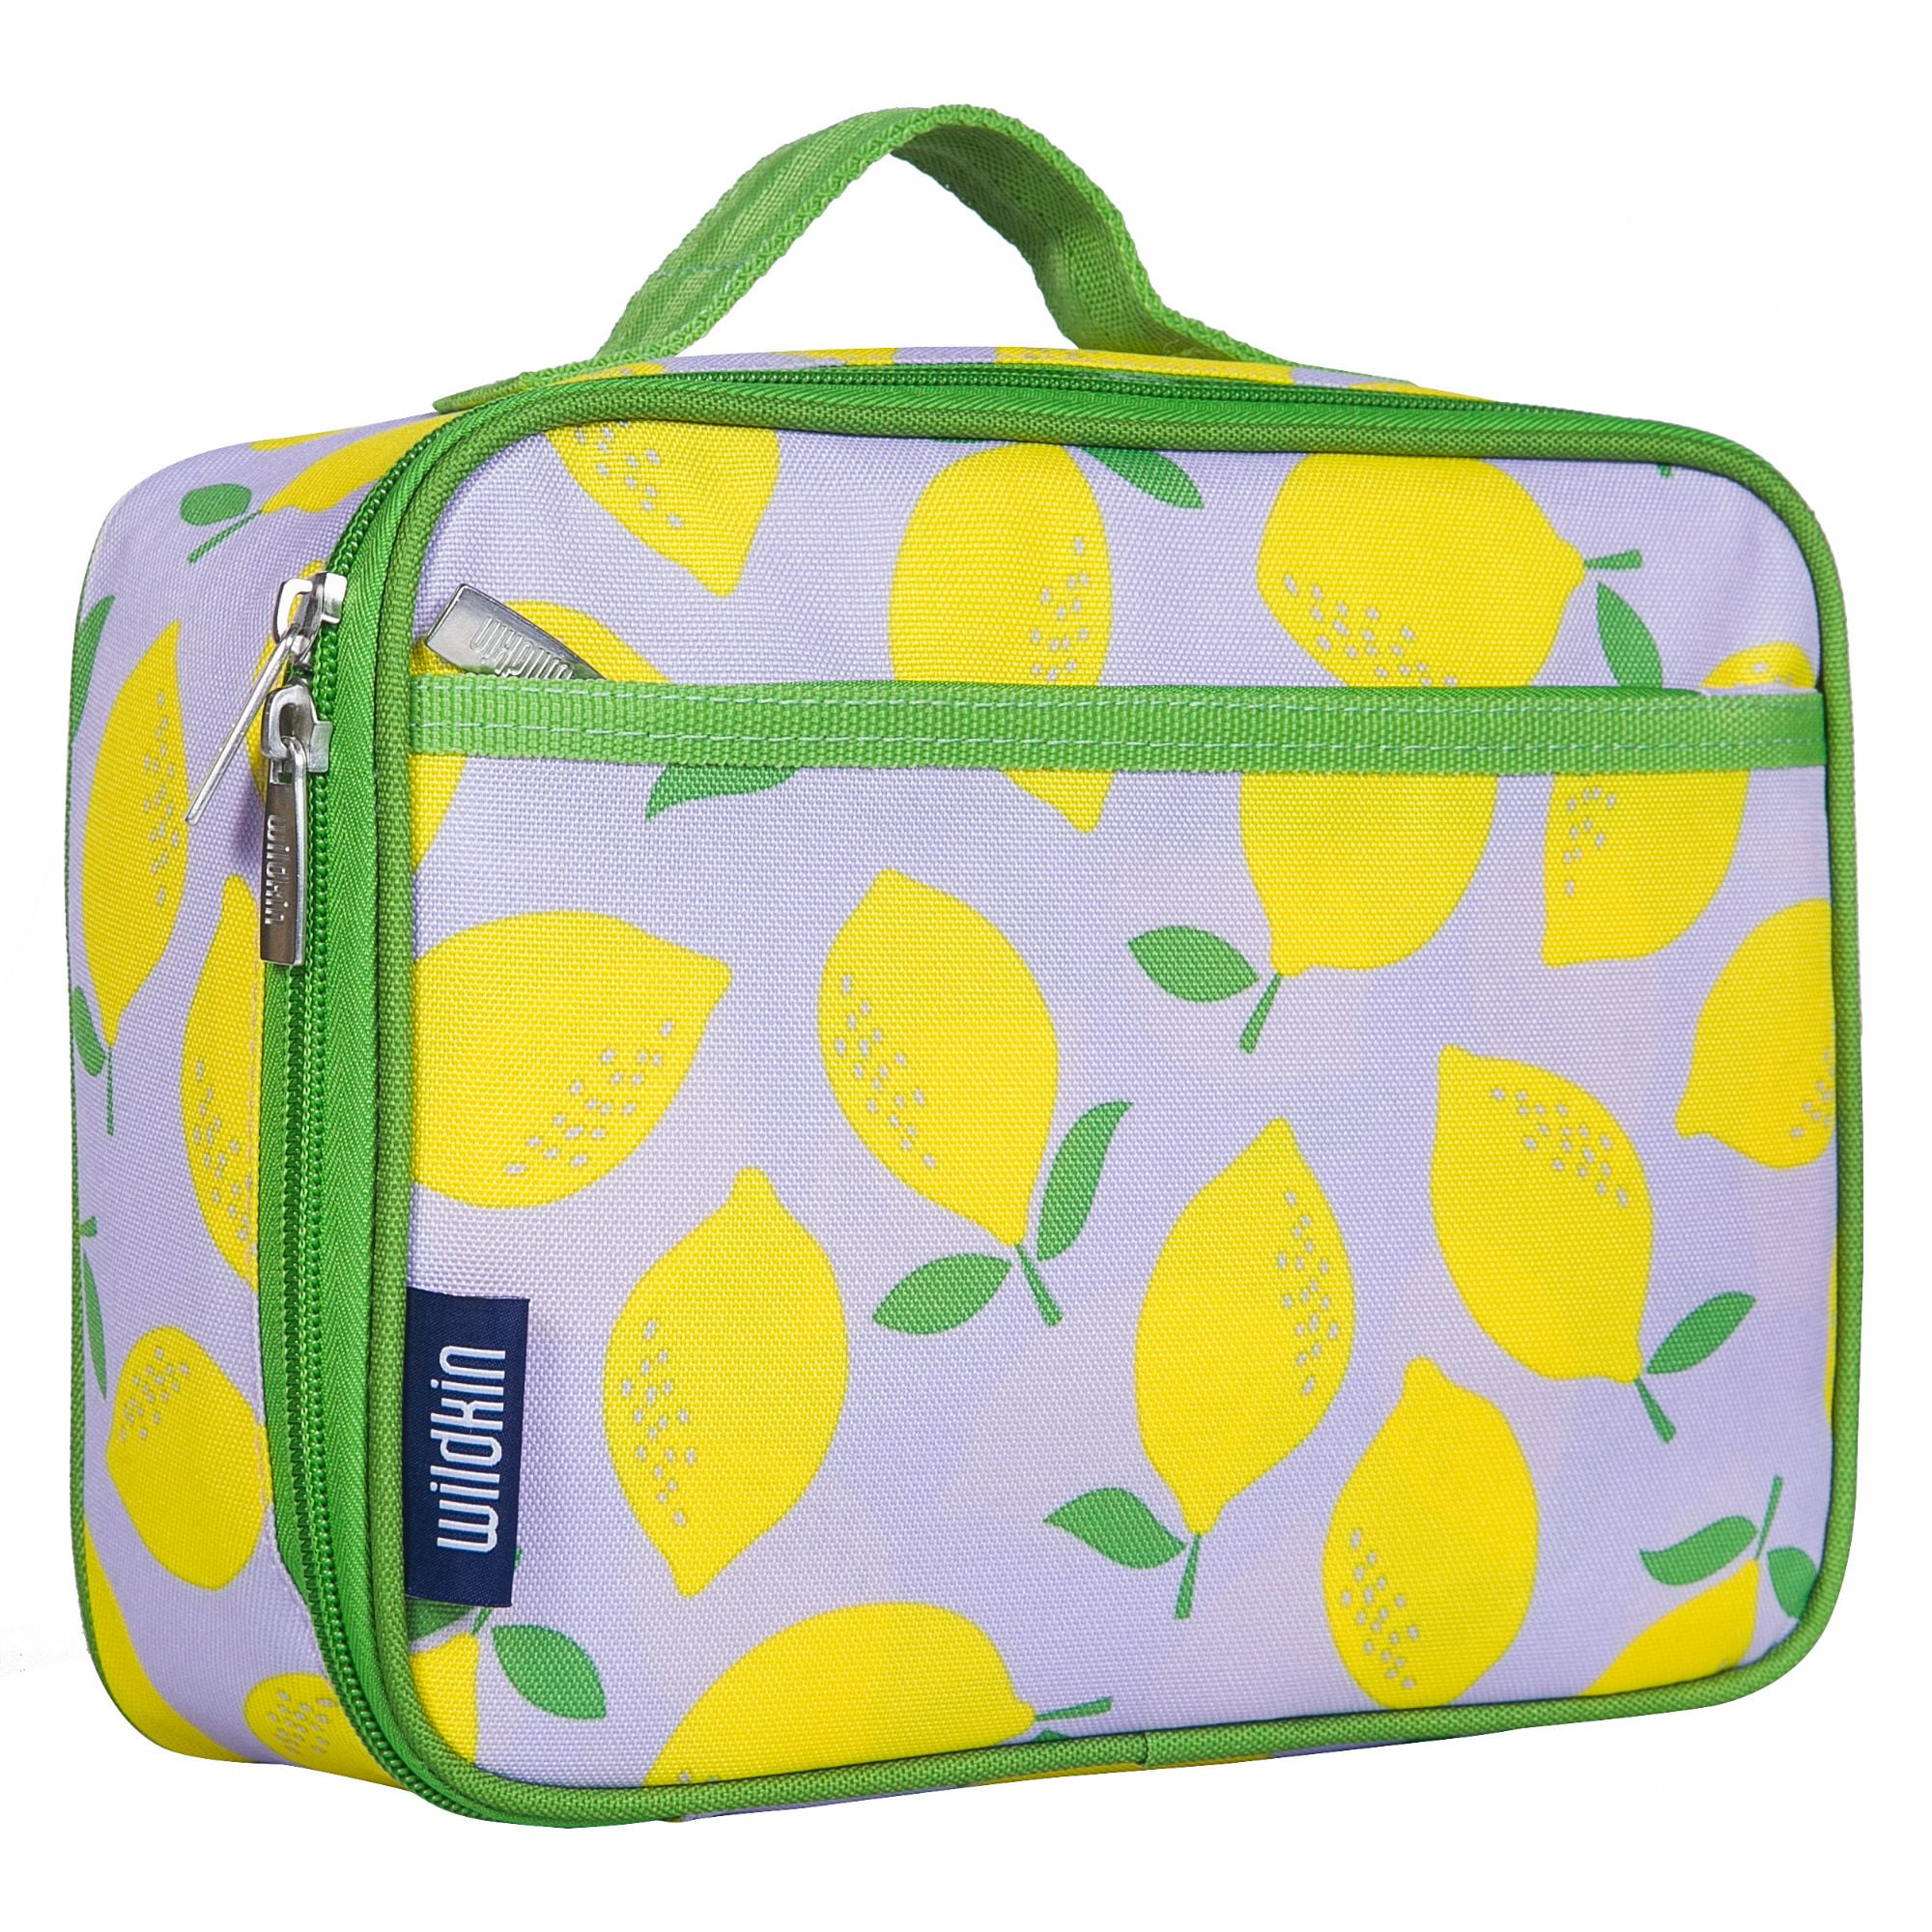 Kids Insulated Lunch Box for Boys Lunch Bag Lunch Box Carrier for